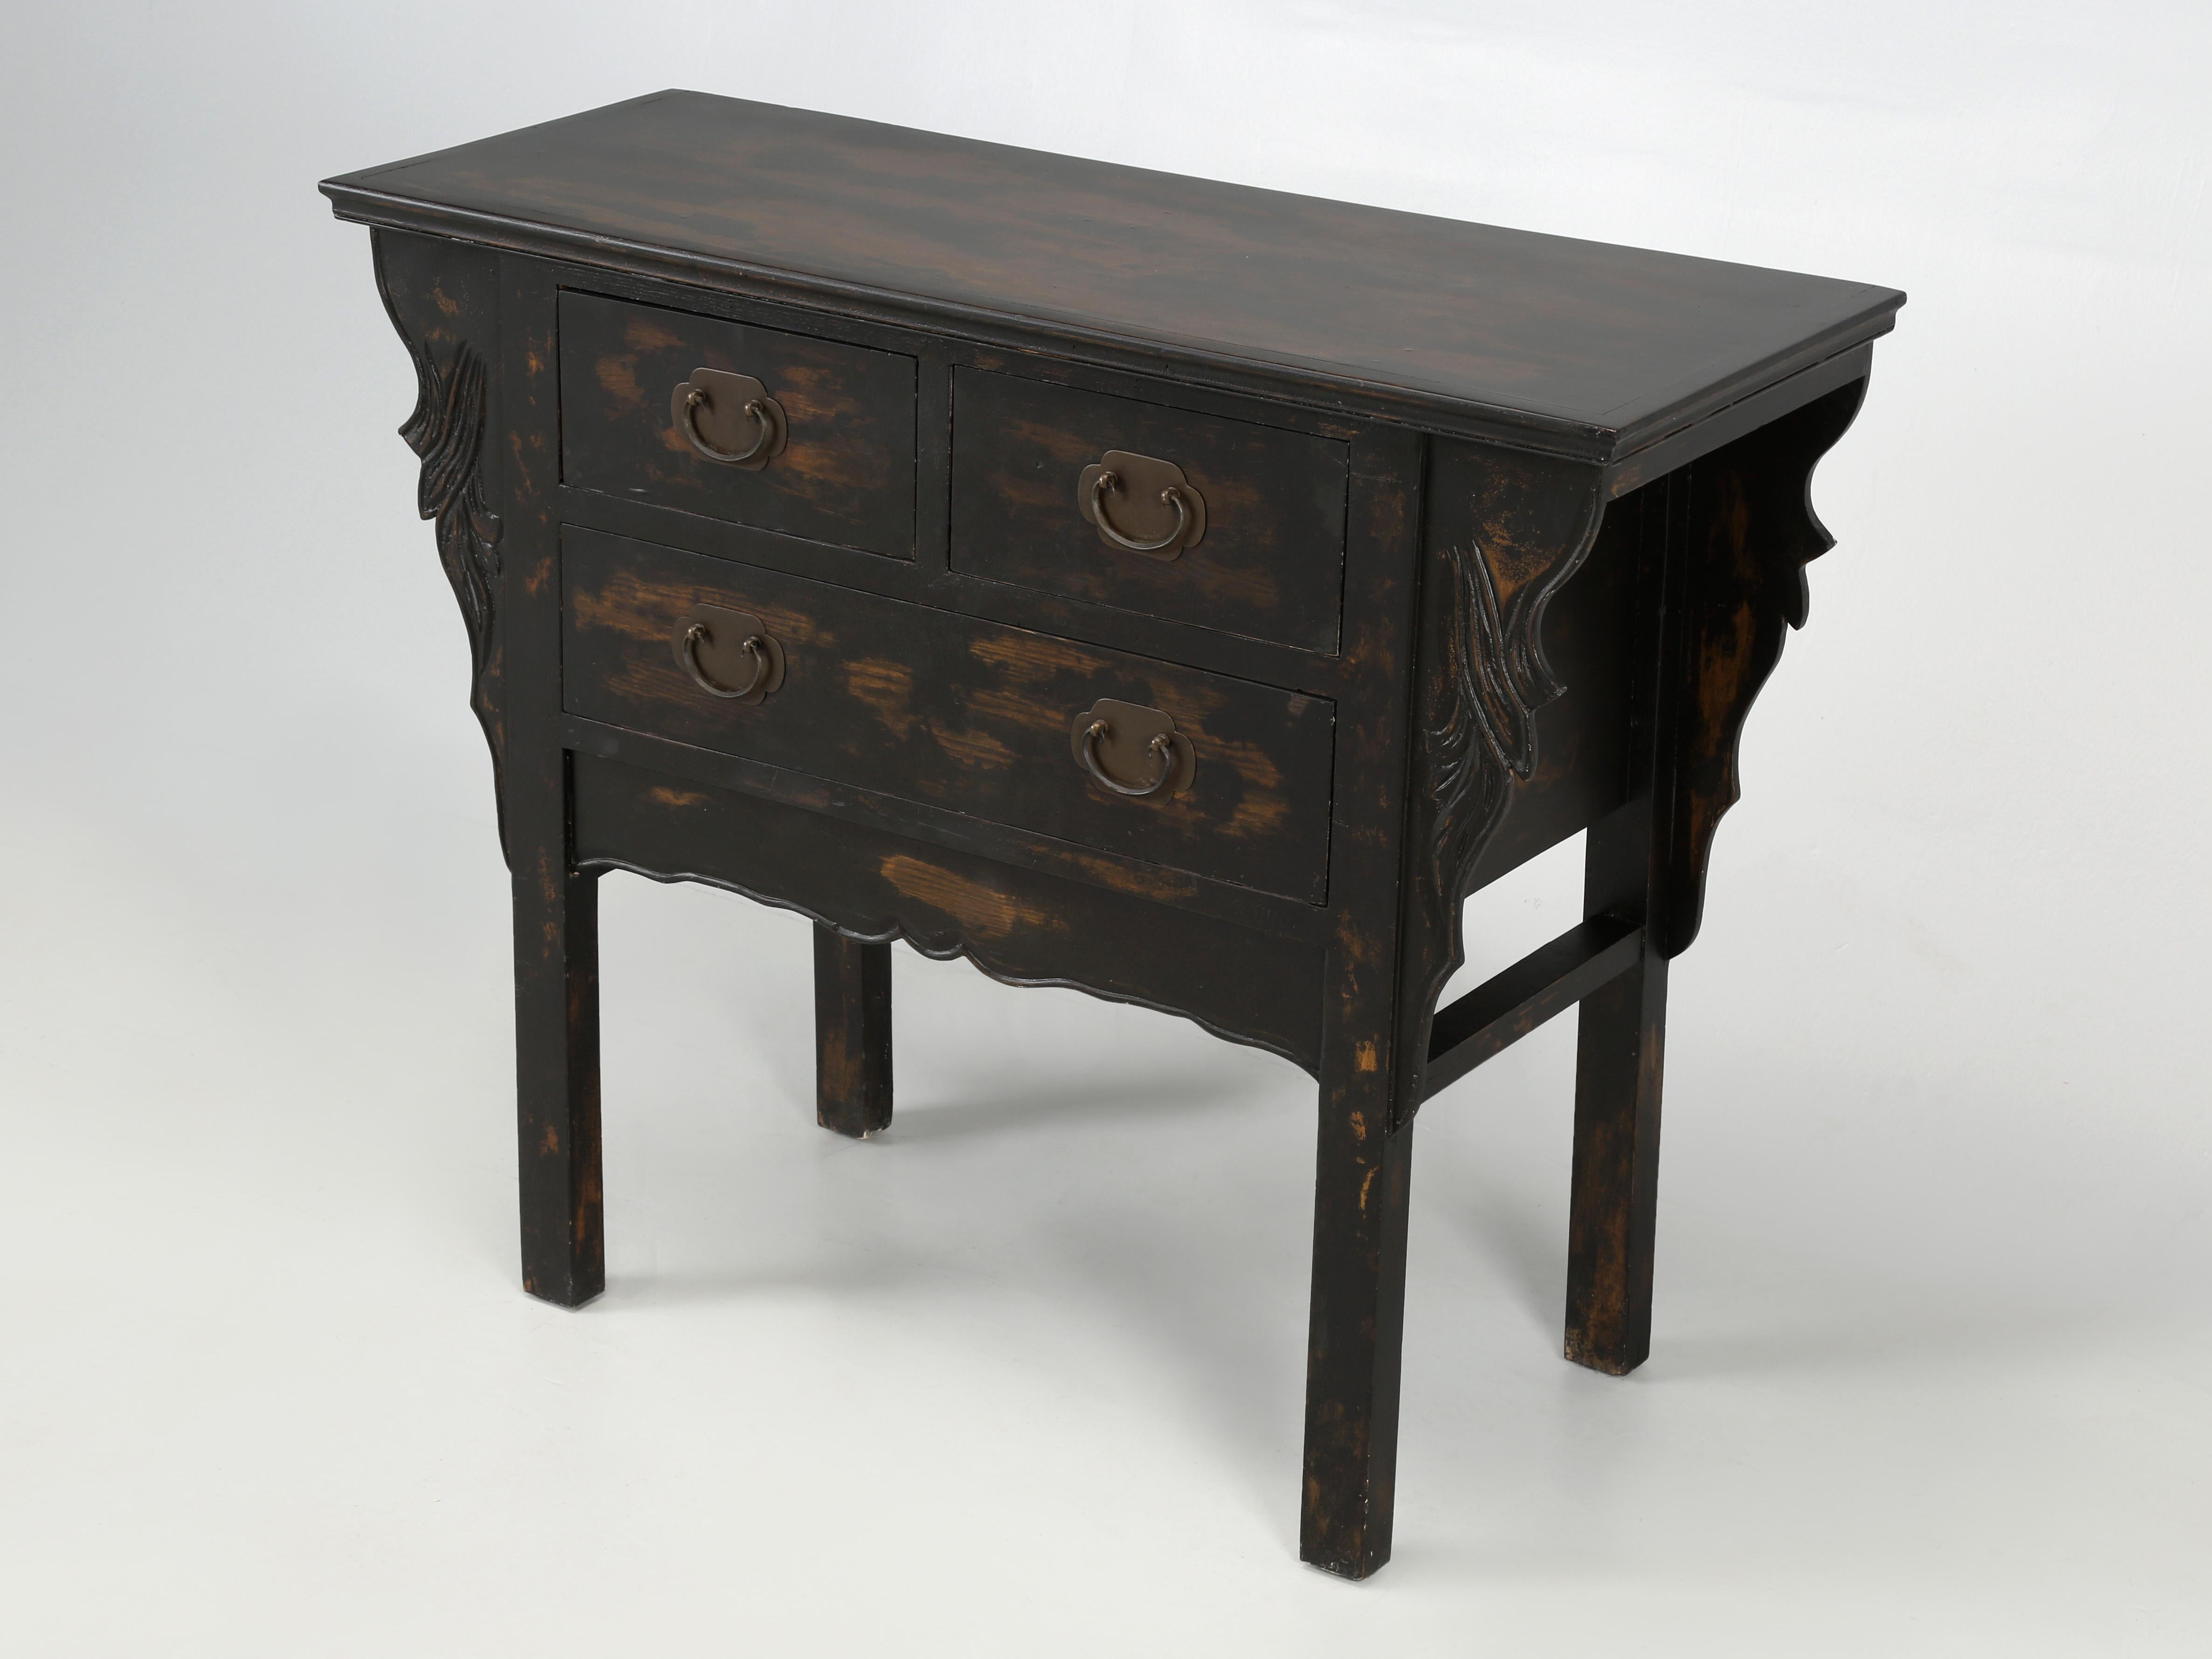 The condition for our Chinese Altar table seems to be too nice for it to have any real ago, although the distressing does give this Chinese altar table or could be used as a console table a nice overall appearance.